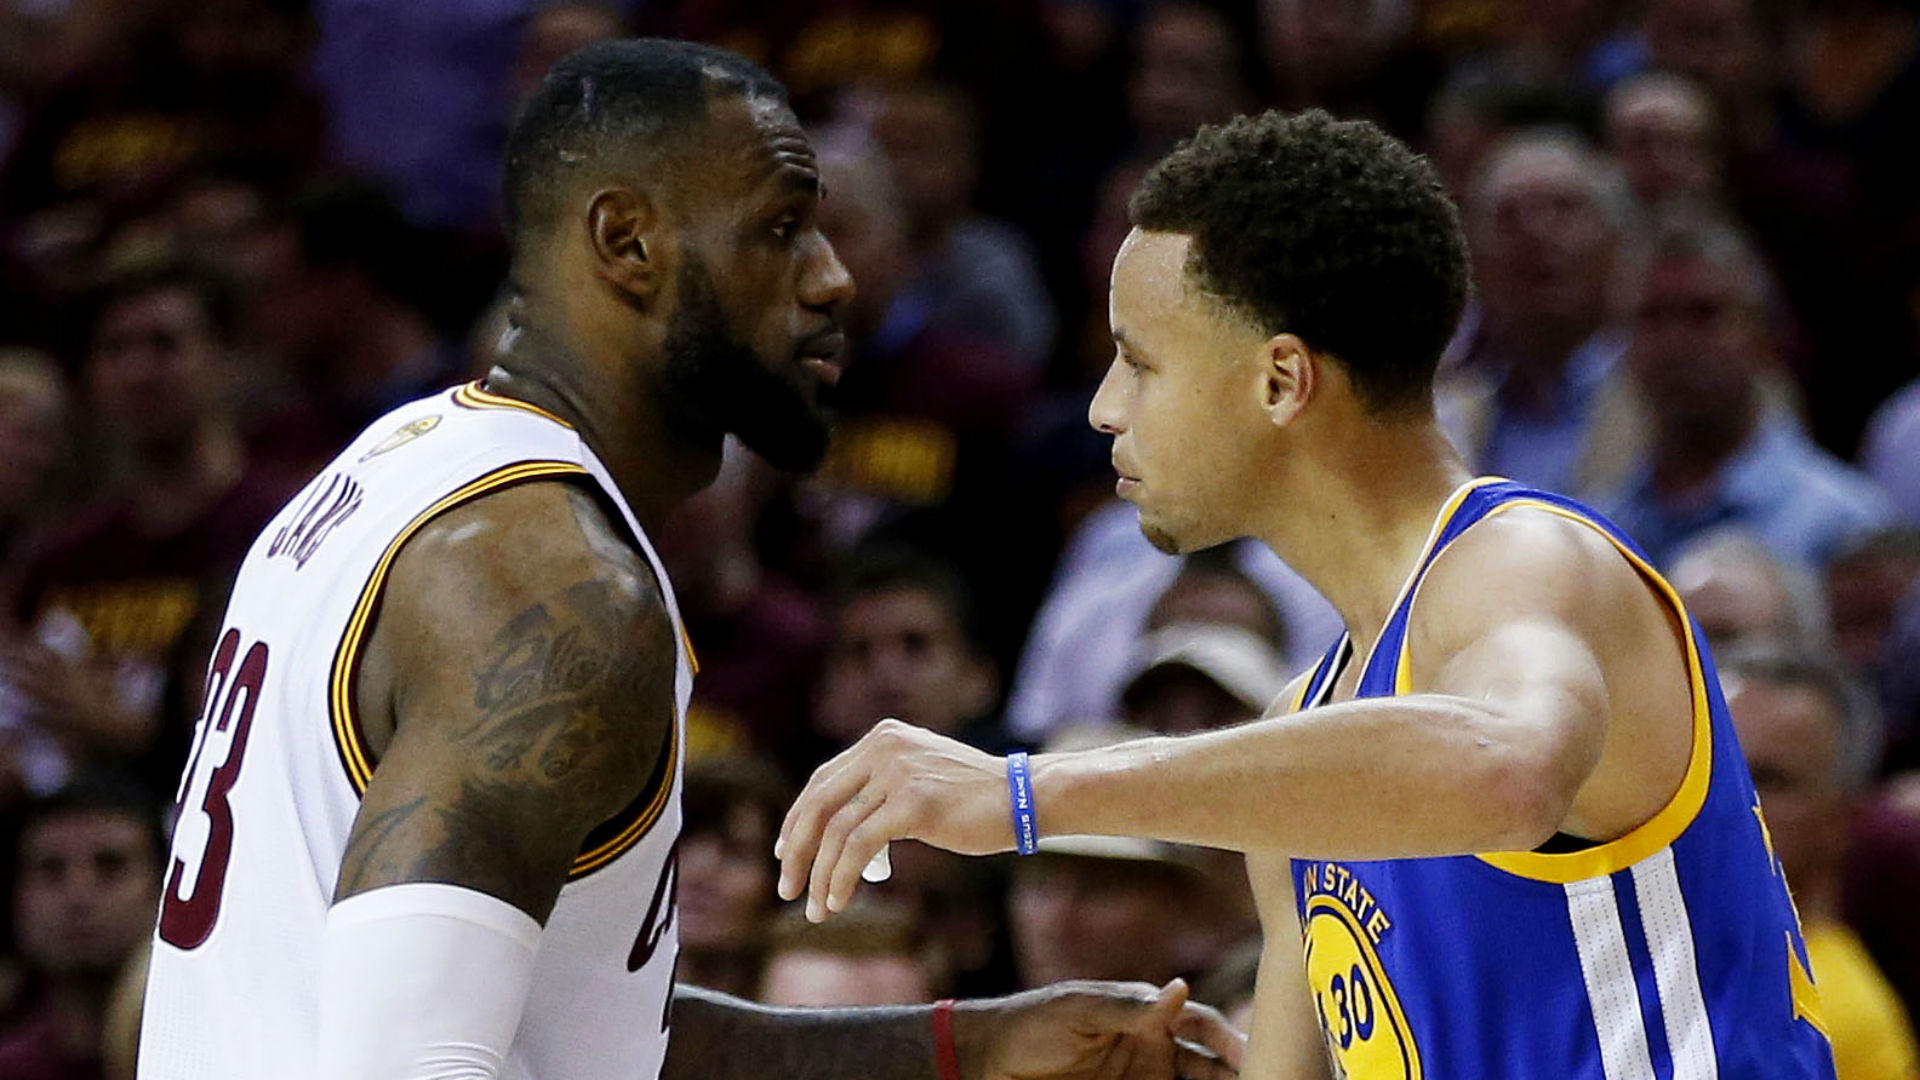 Lebron James Stephen Curry 061715 Getty Ftr Us - Basketball Players Shaking Hands - HD Wallpaper 